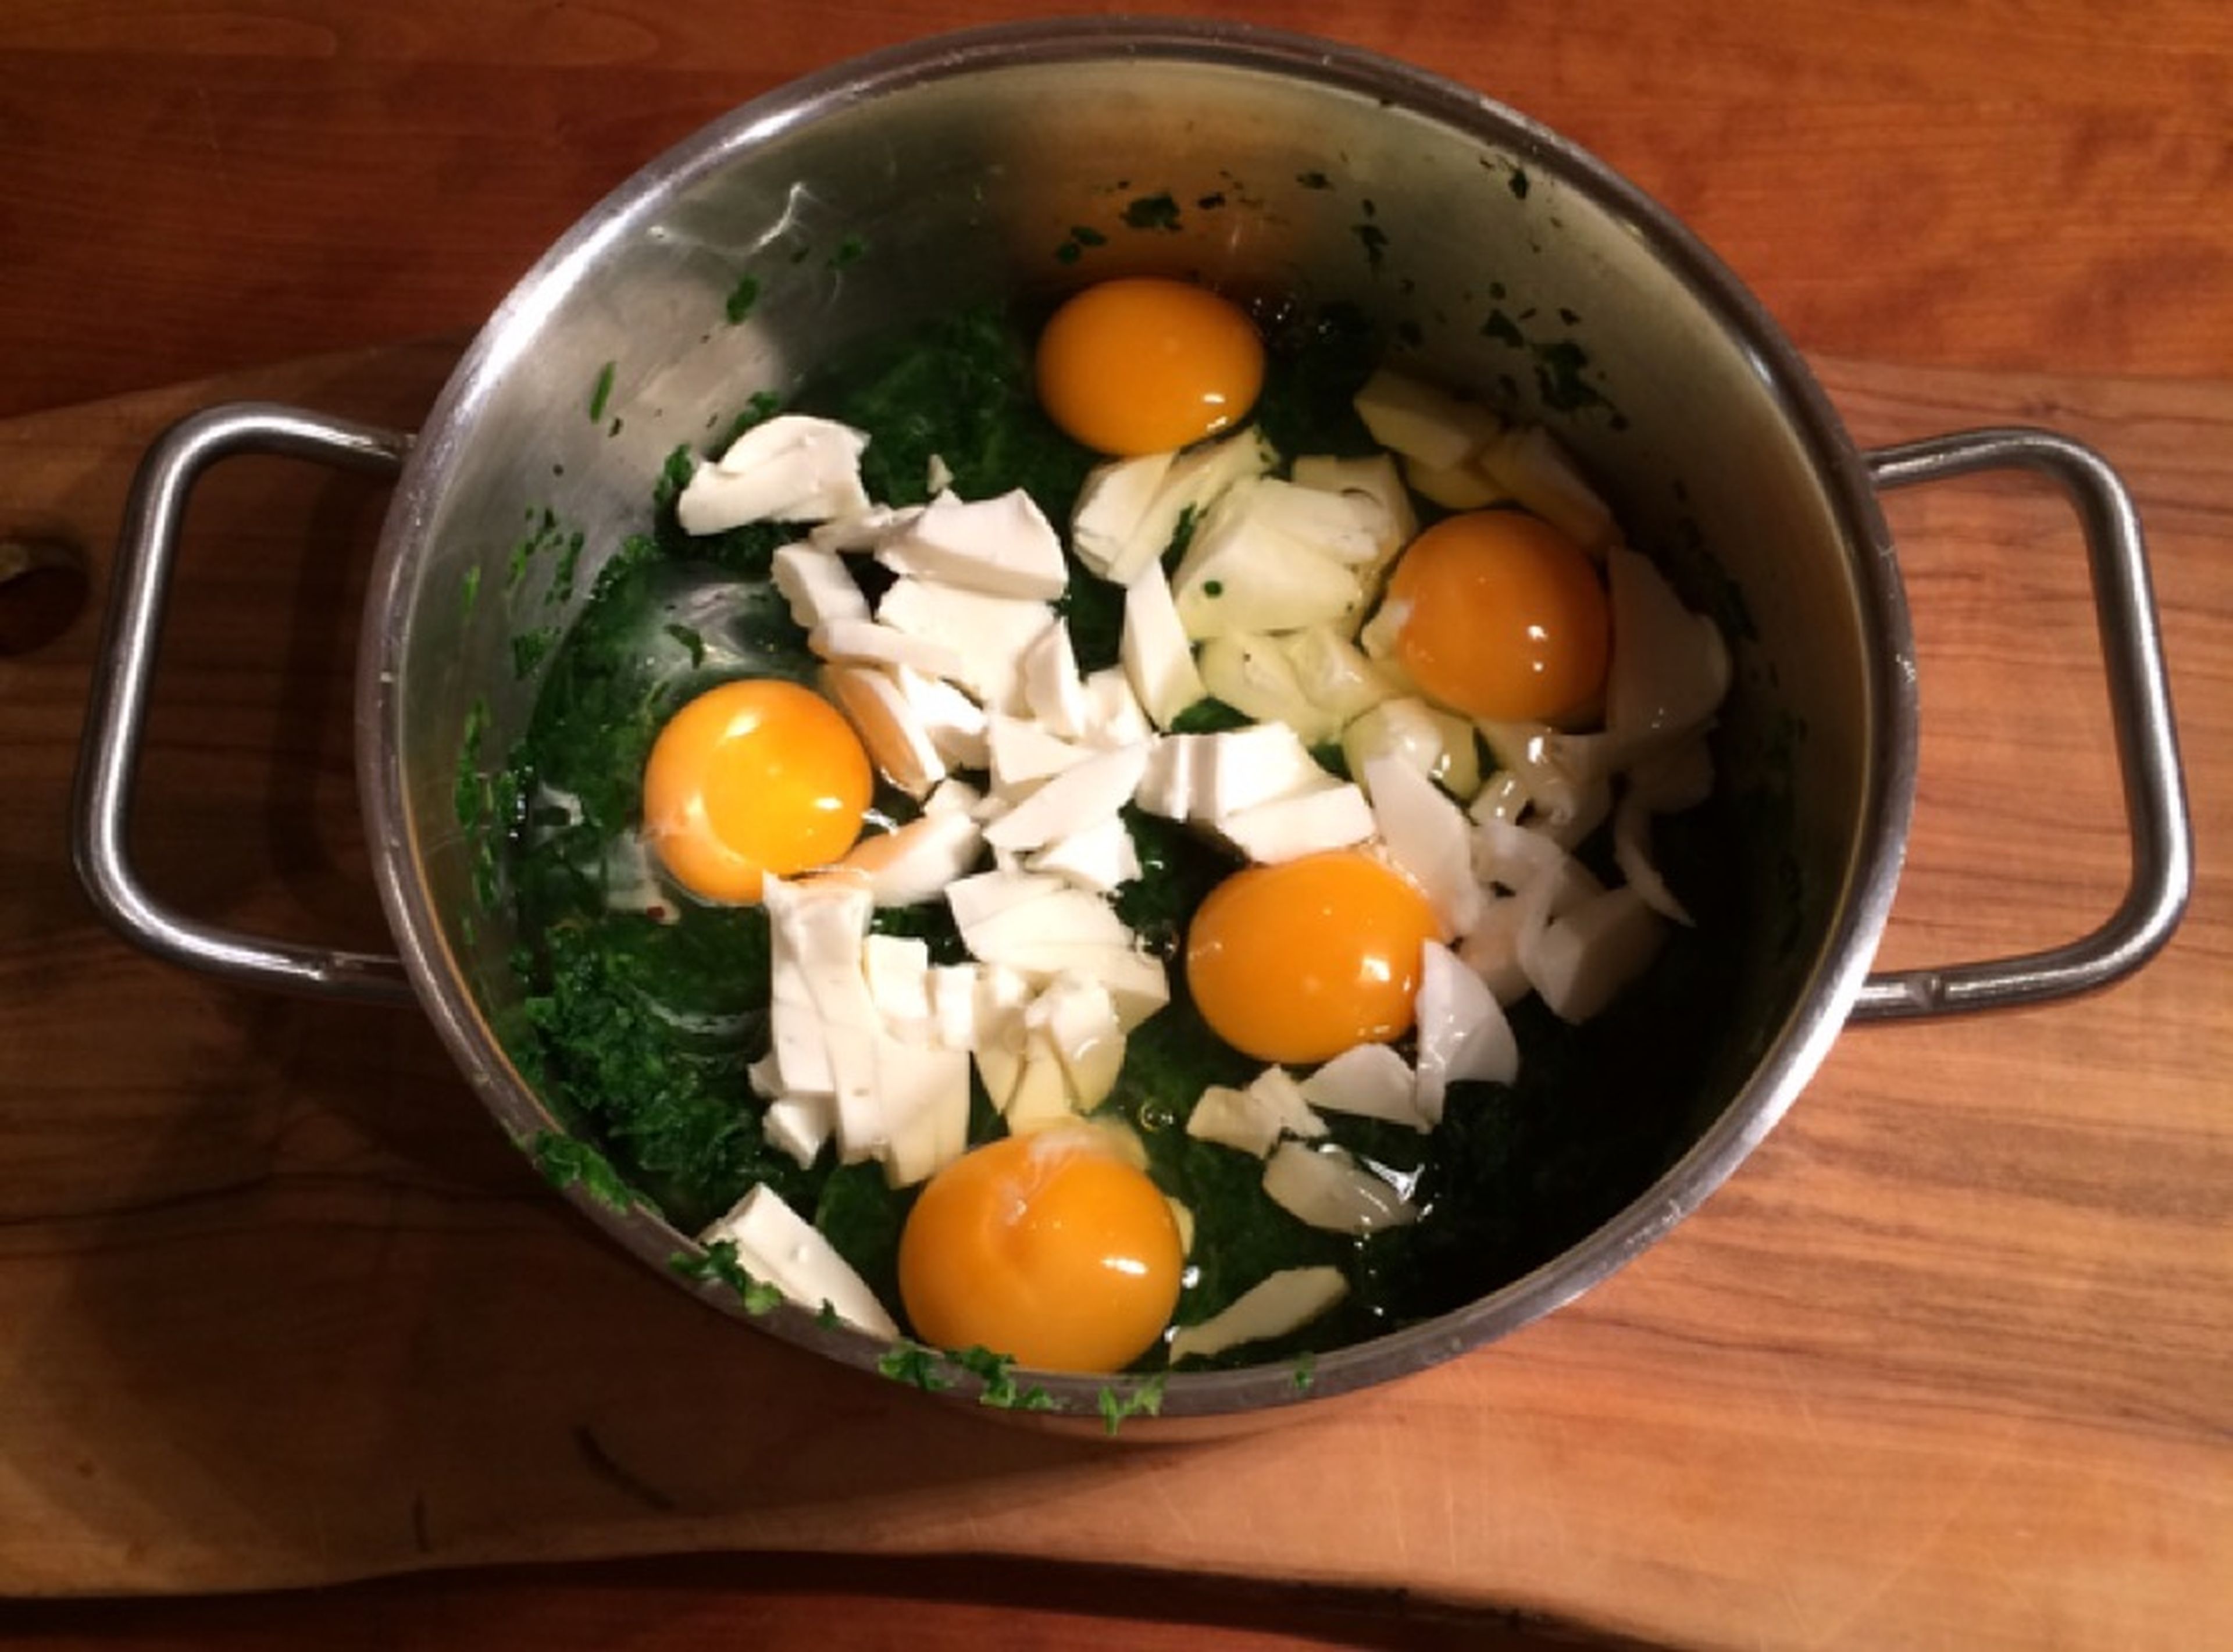 Preheat the oven to 200°C/390°F. Heat the spinach in a pot. In the meantime, finely chop the mozzarella. If the spinach is very watery, drain in a sieve. Add eggs and mozzarella to the spinach, then mix well to combine.